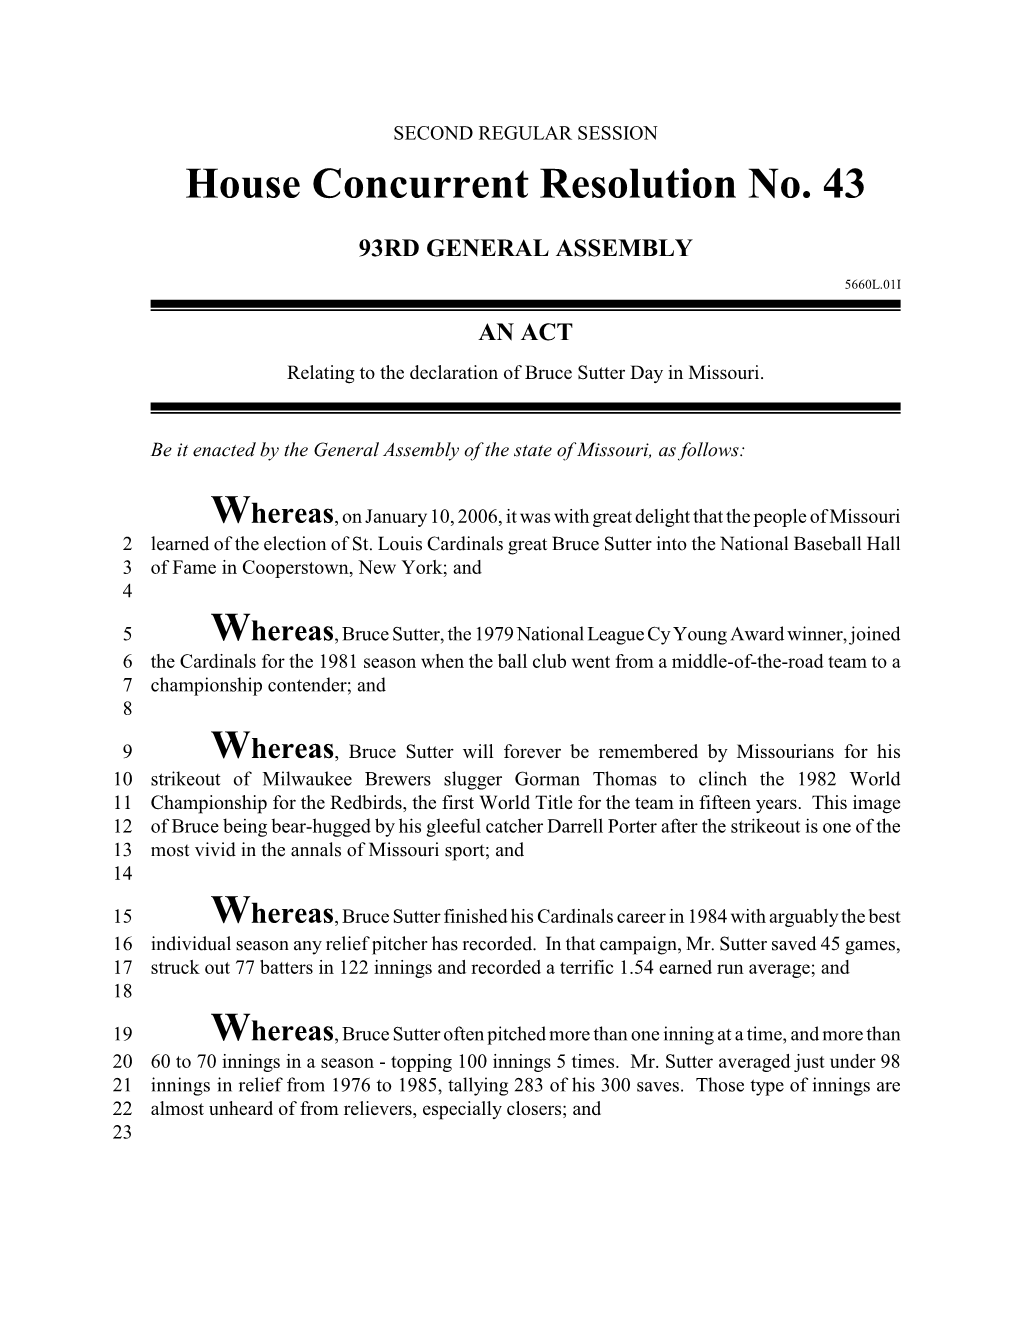 House Concurrent Resolution No. 43